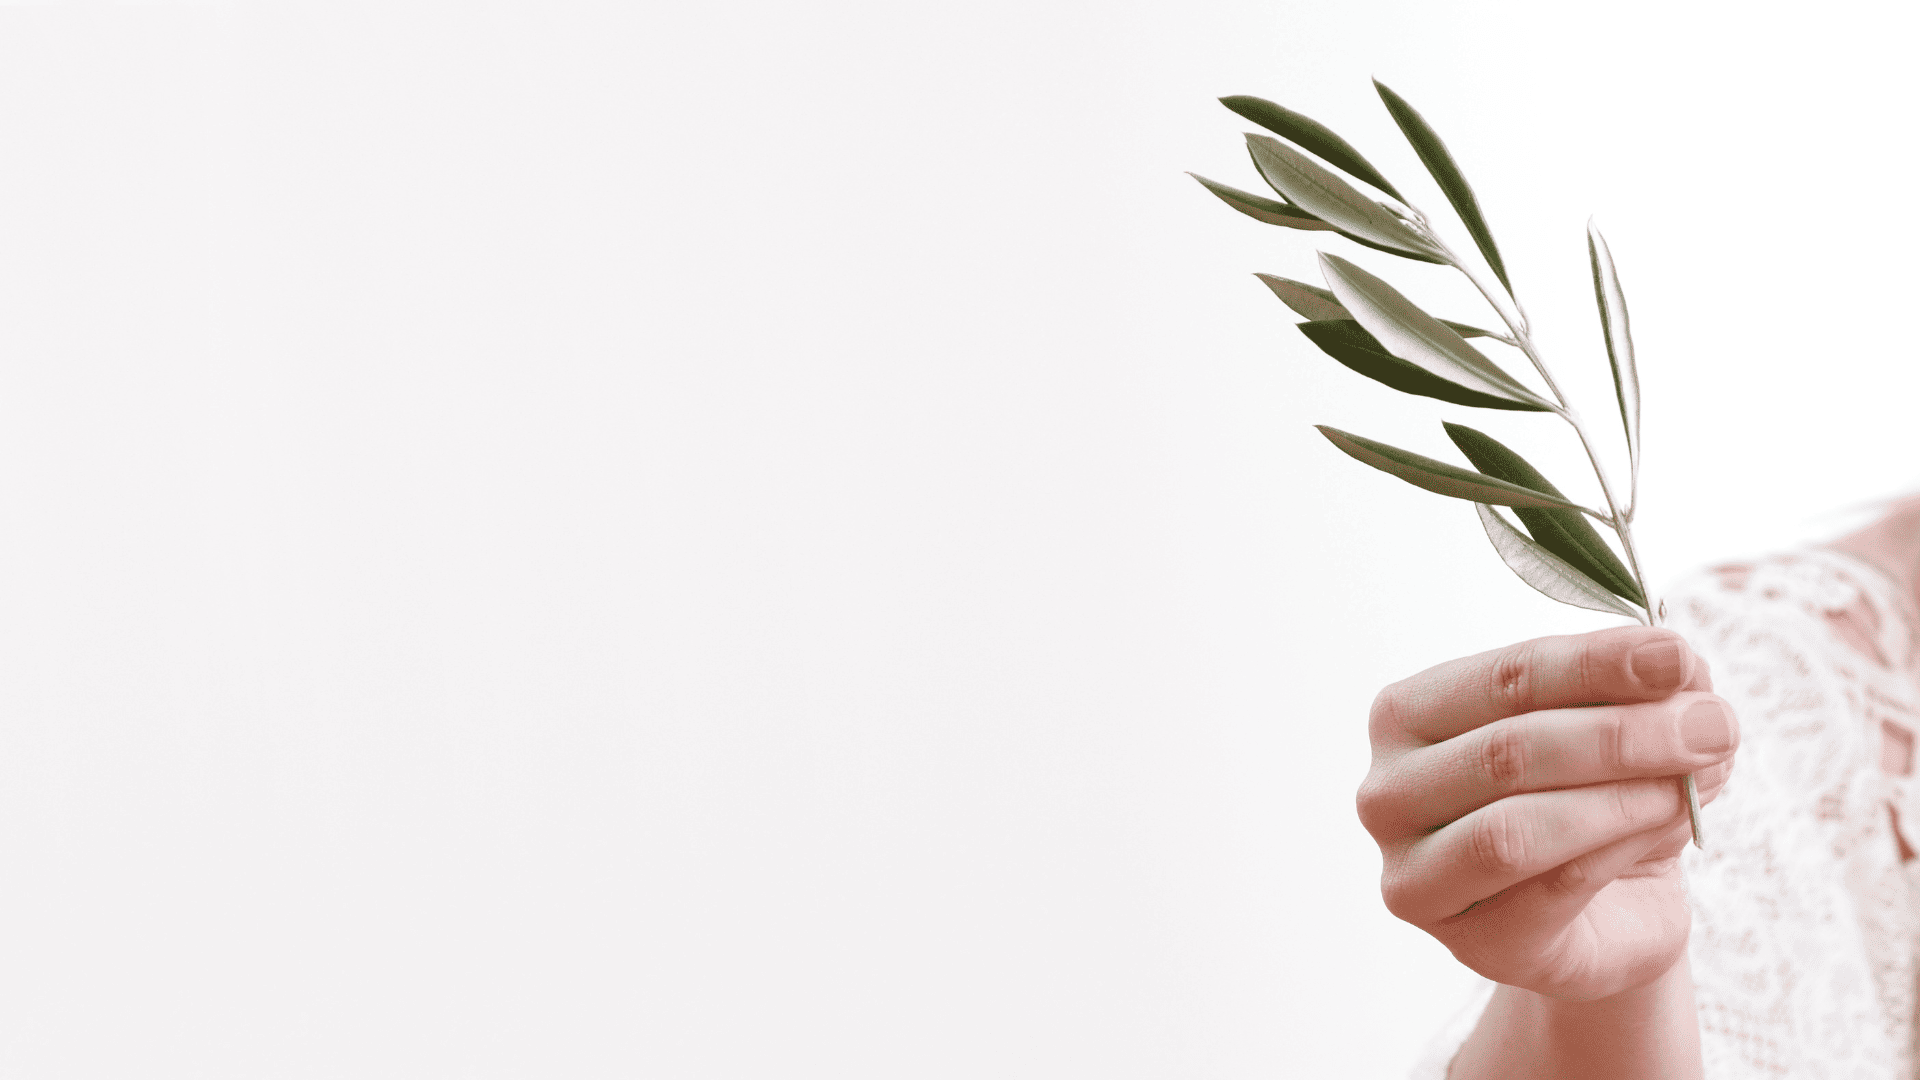 Hand holding an olivebranch, the universal symbol of a peacemaker